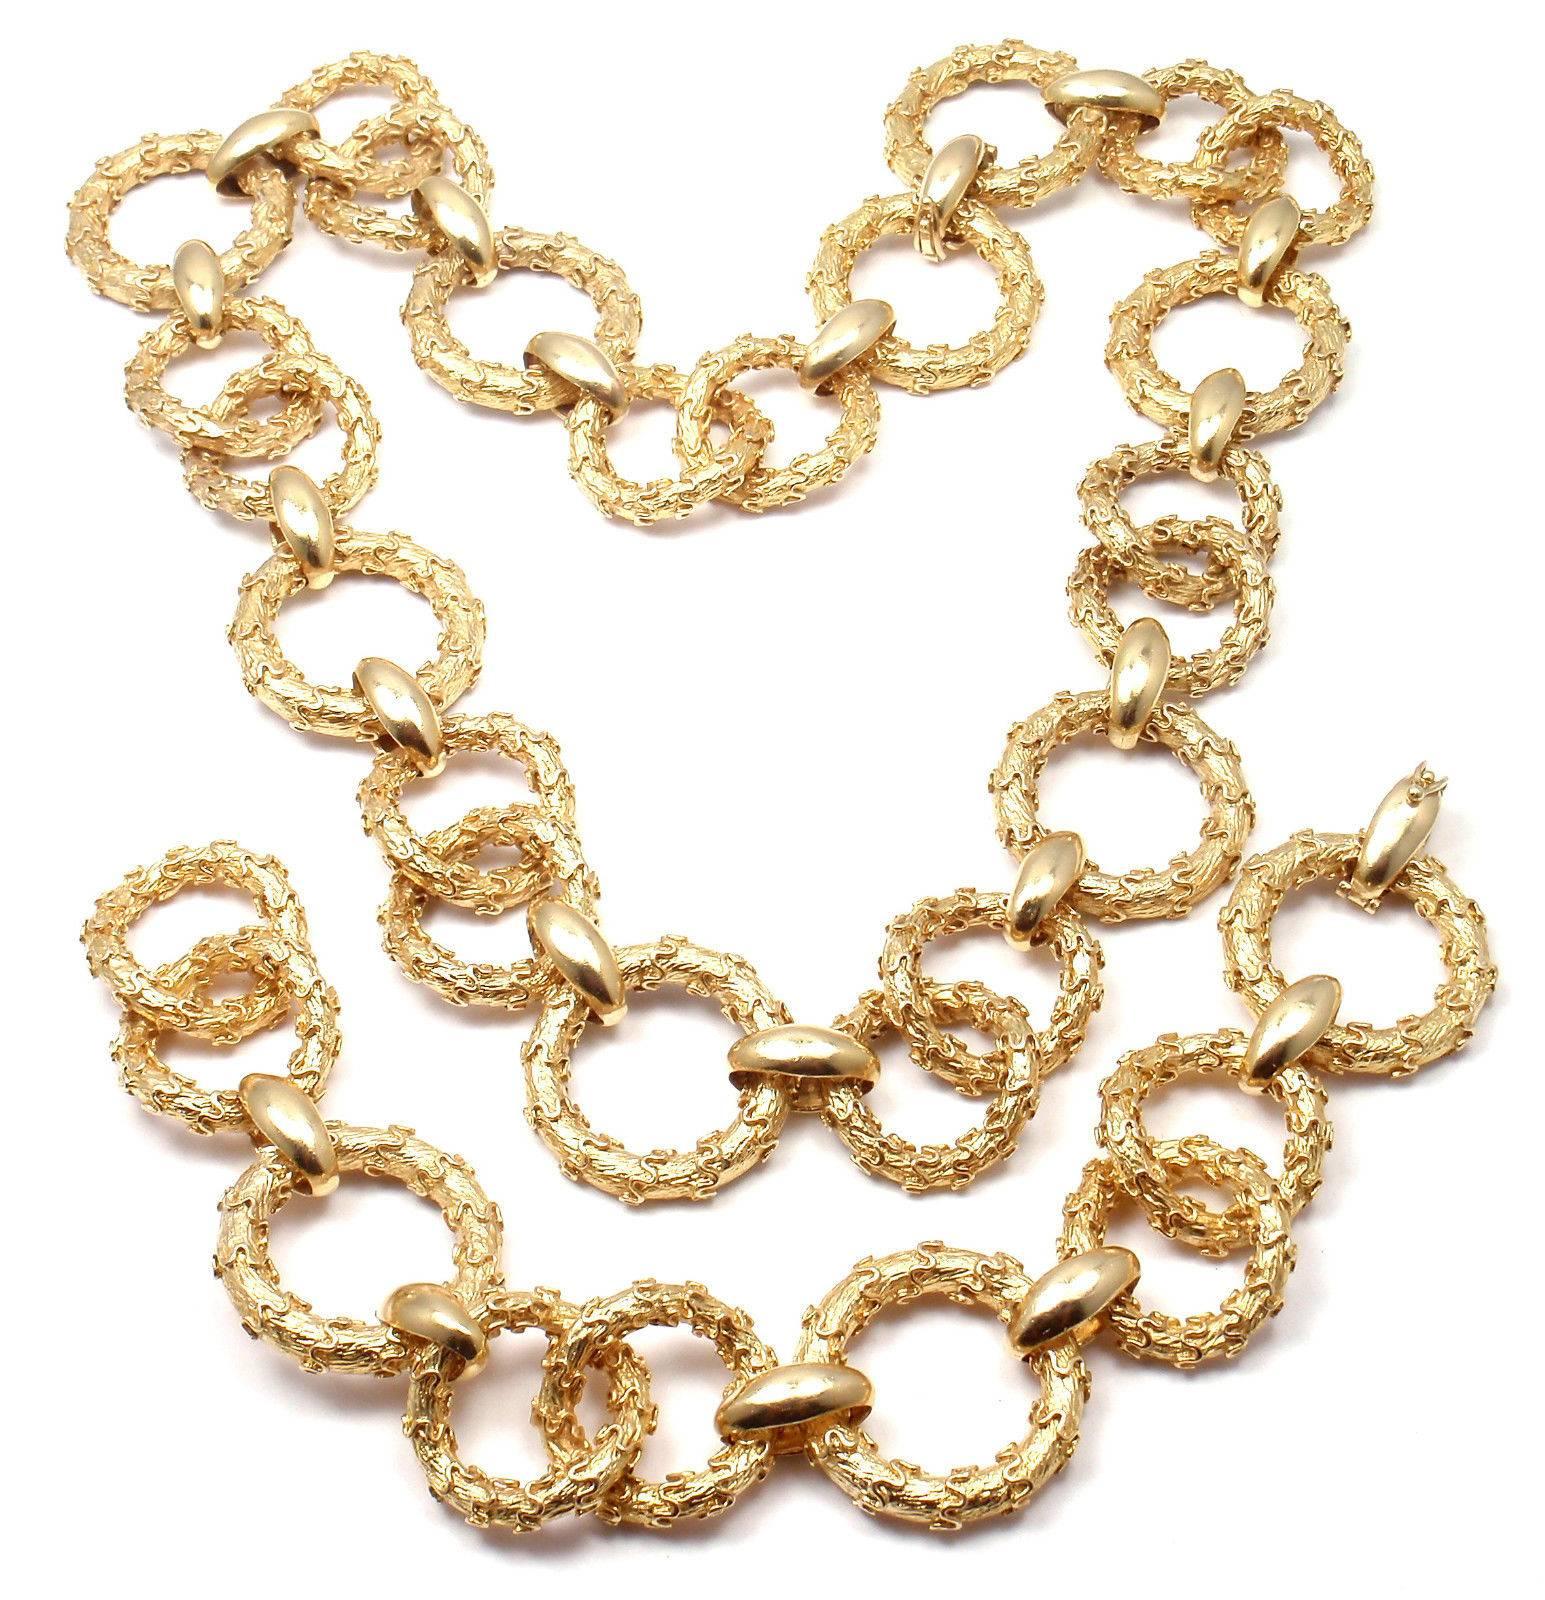 14k Yellow Gold Link Bracelet And Necklace by Hammerman Brothers. 

This necklace is 29